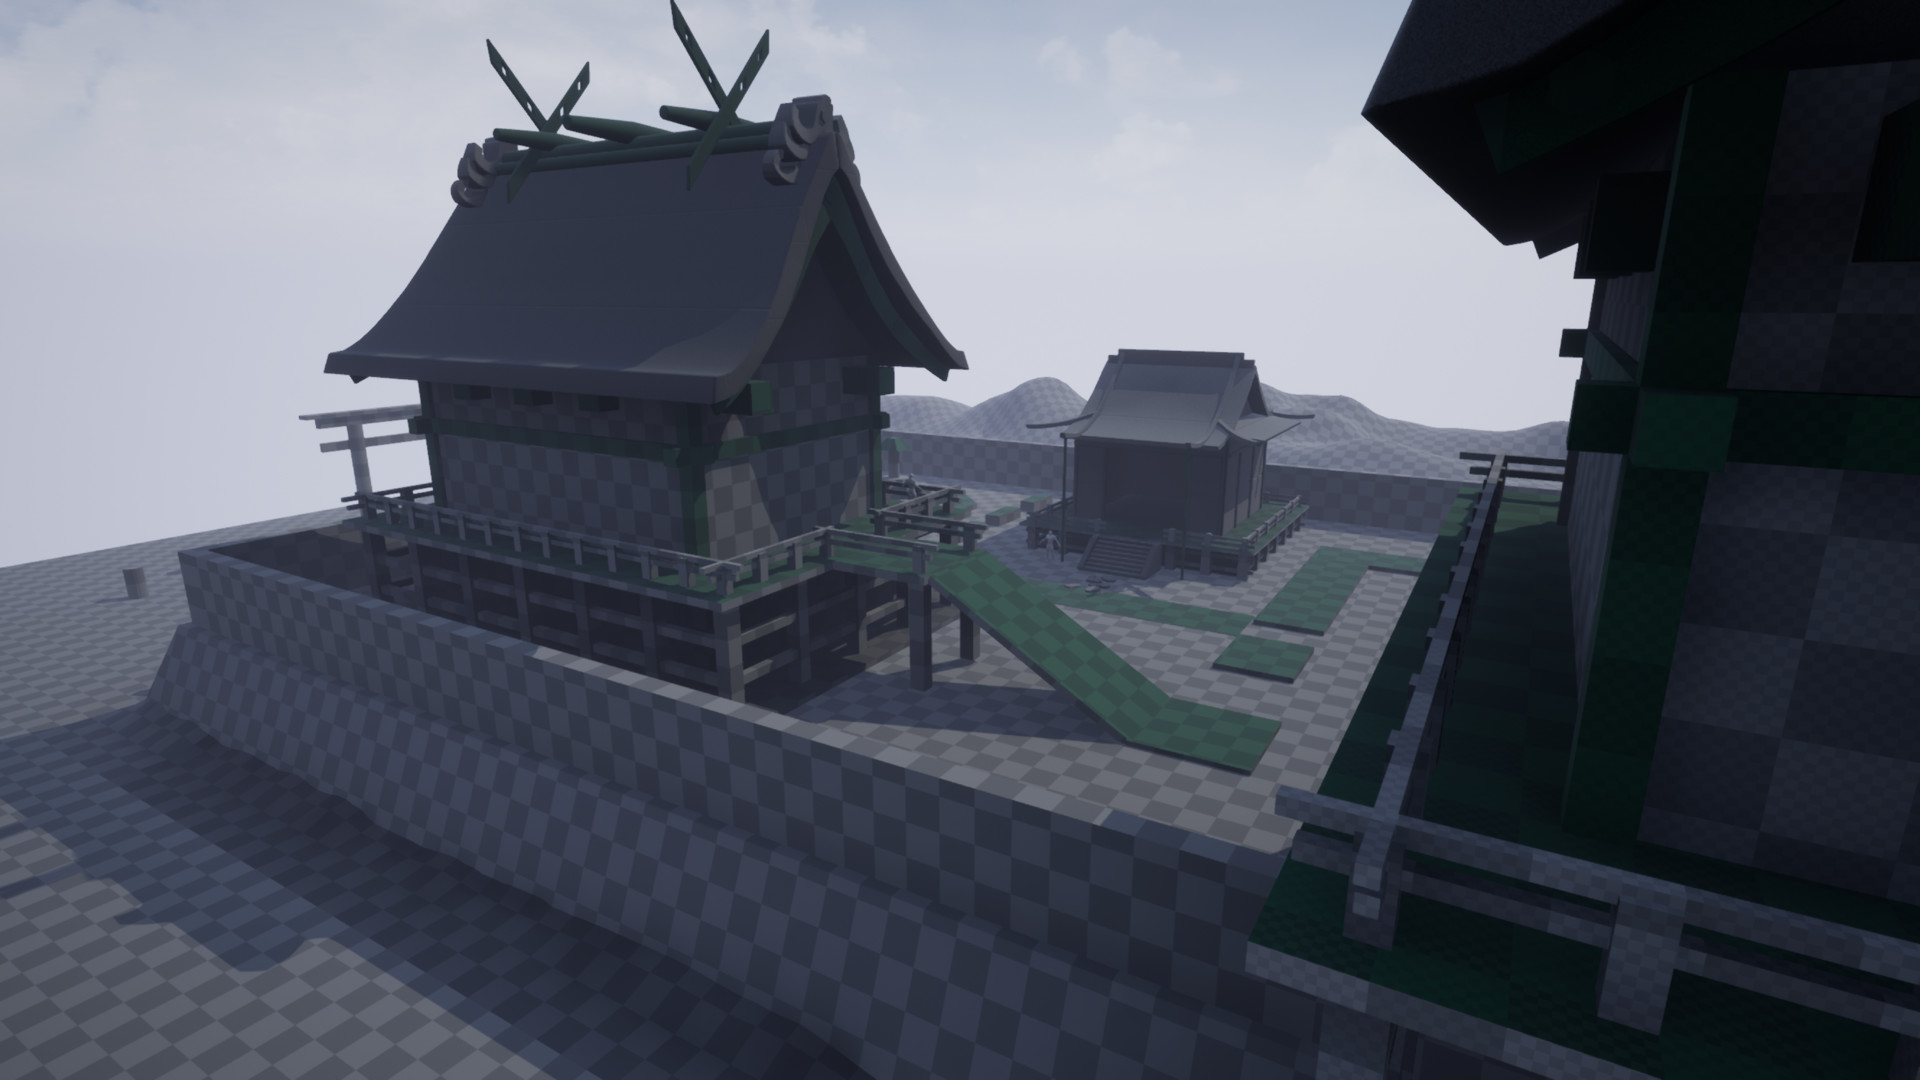 A view (screenshot from Unreal) showing close up, in a dark spot between two buildings. This time around, the structures have roofing that looks in a typical, Feudal Japan style (sharp angle, large decorative pieces on the top).